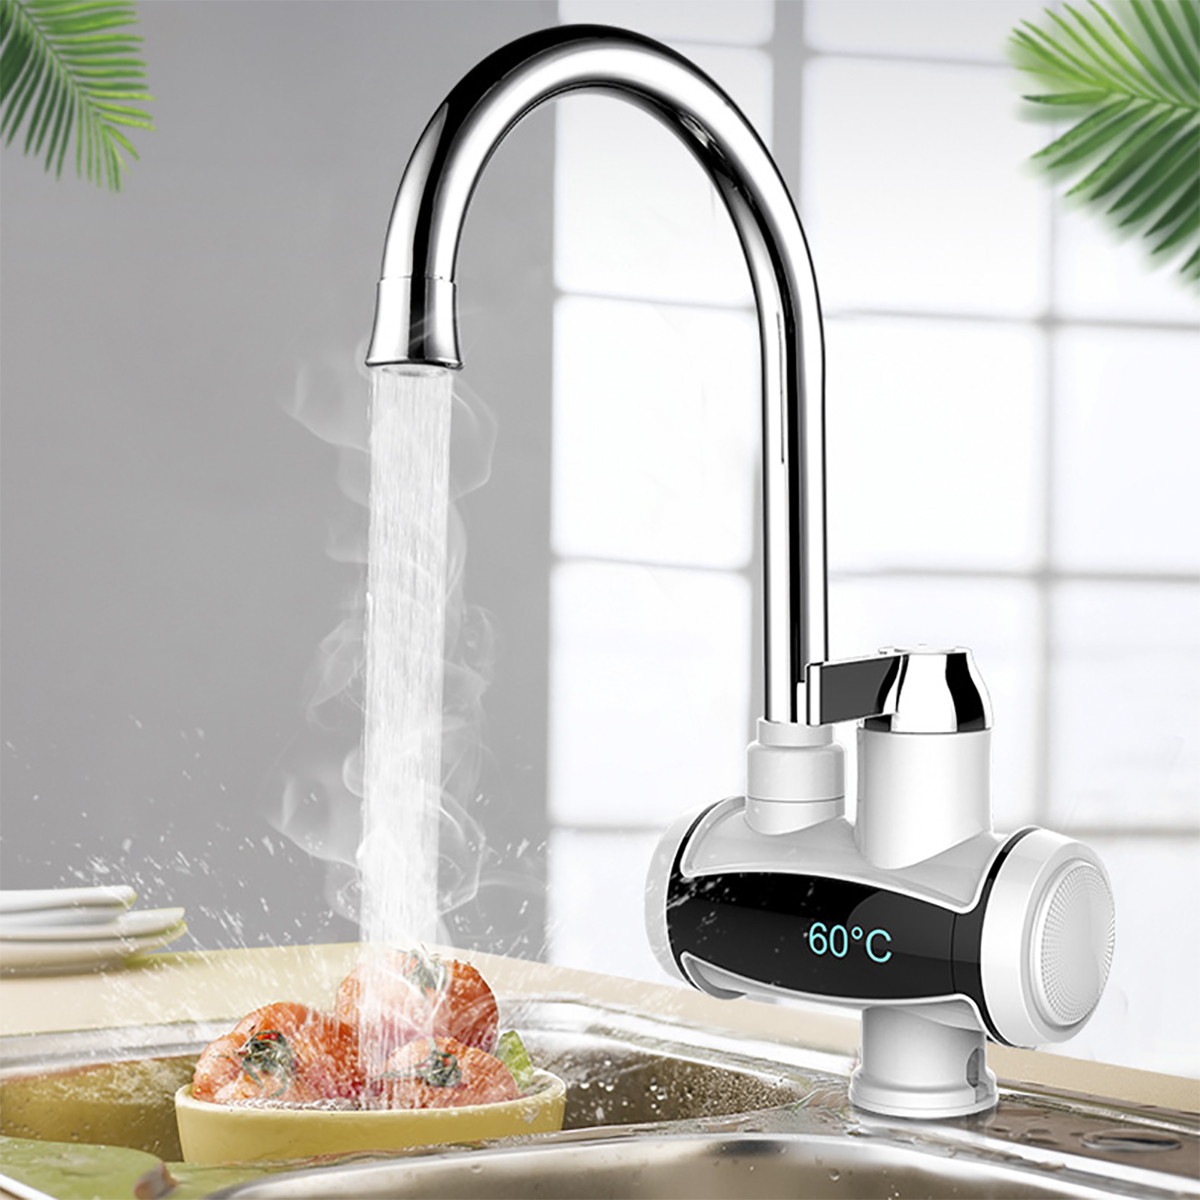 Color : Under Faucet Household Stainless Steel 3000W Heater Water and Electric Insulation 220V Built-in Water Heater Kitchen and Bathroom HAODAMAI 